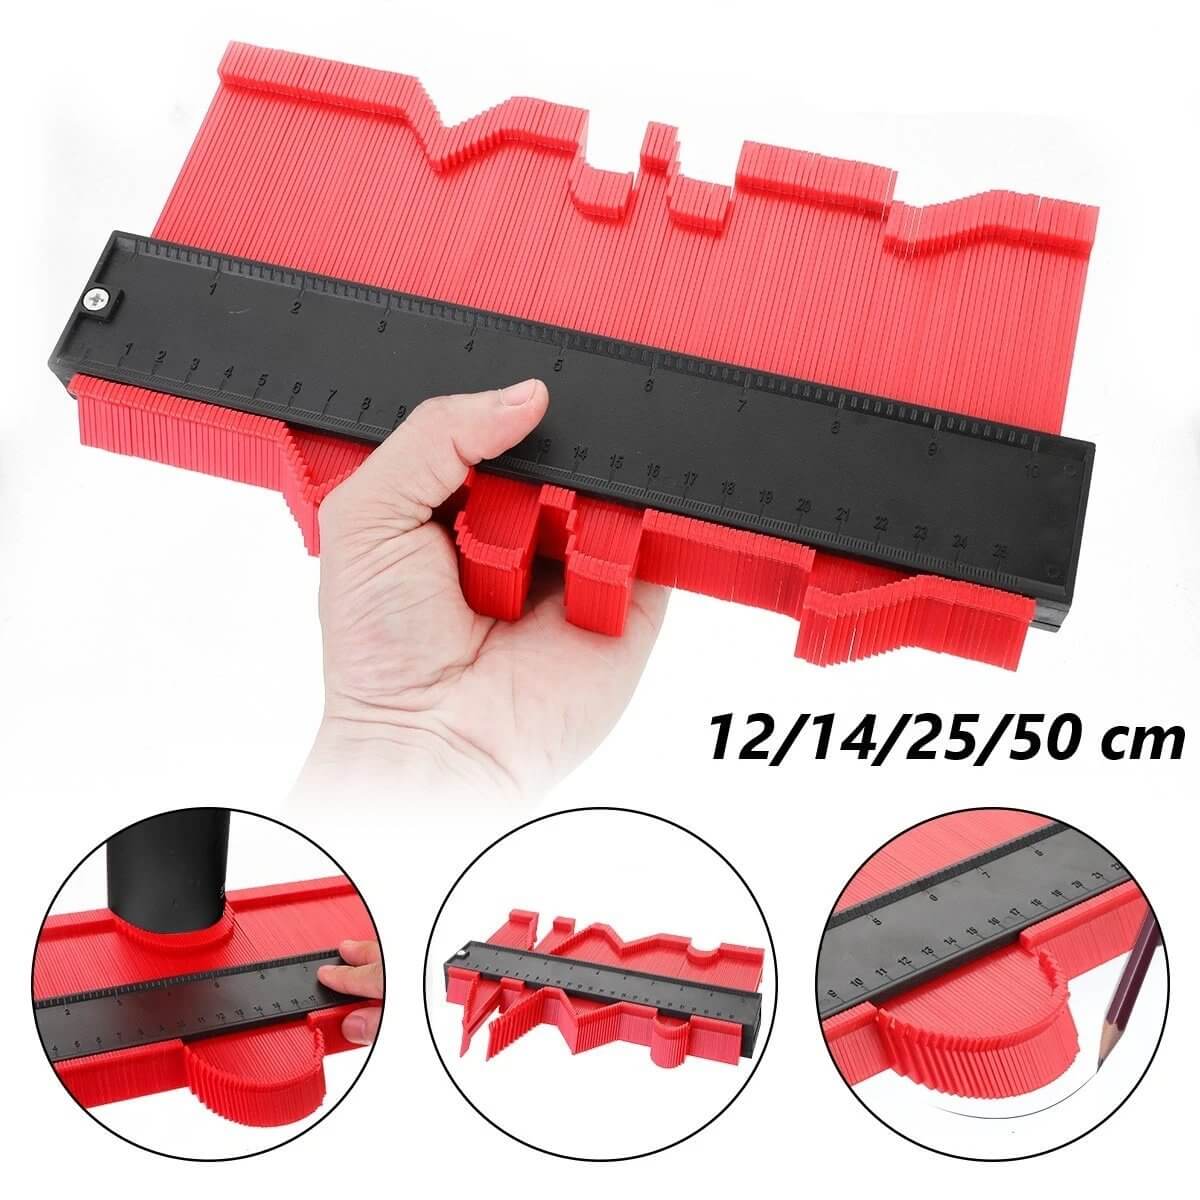 3D Measuring Tool - UTILITY5STORE